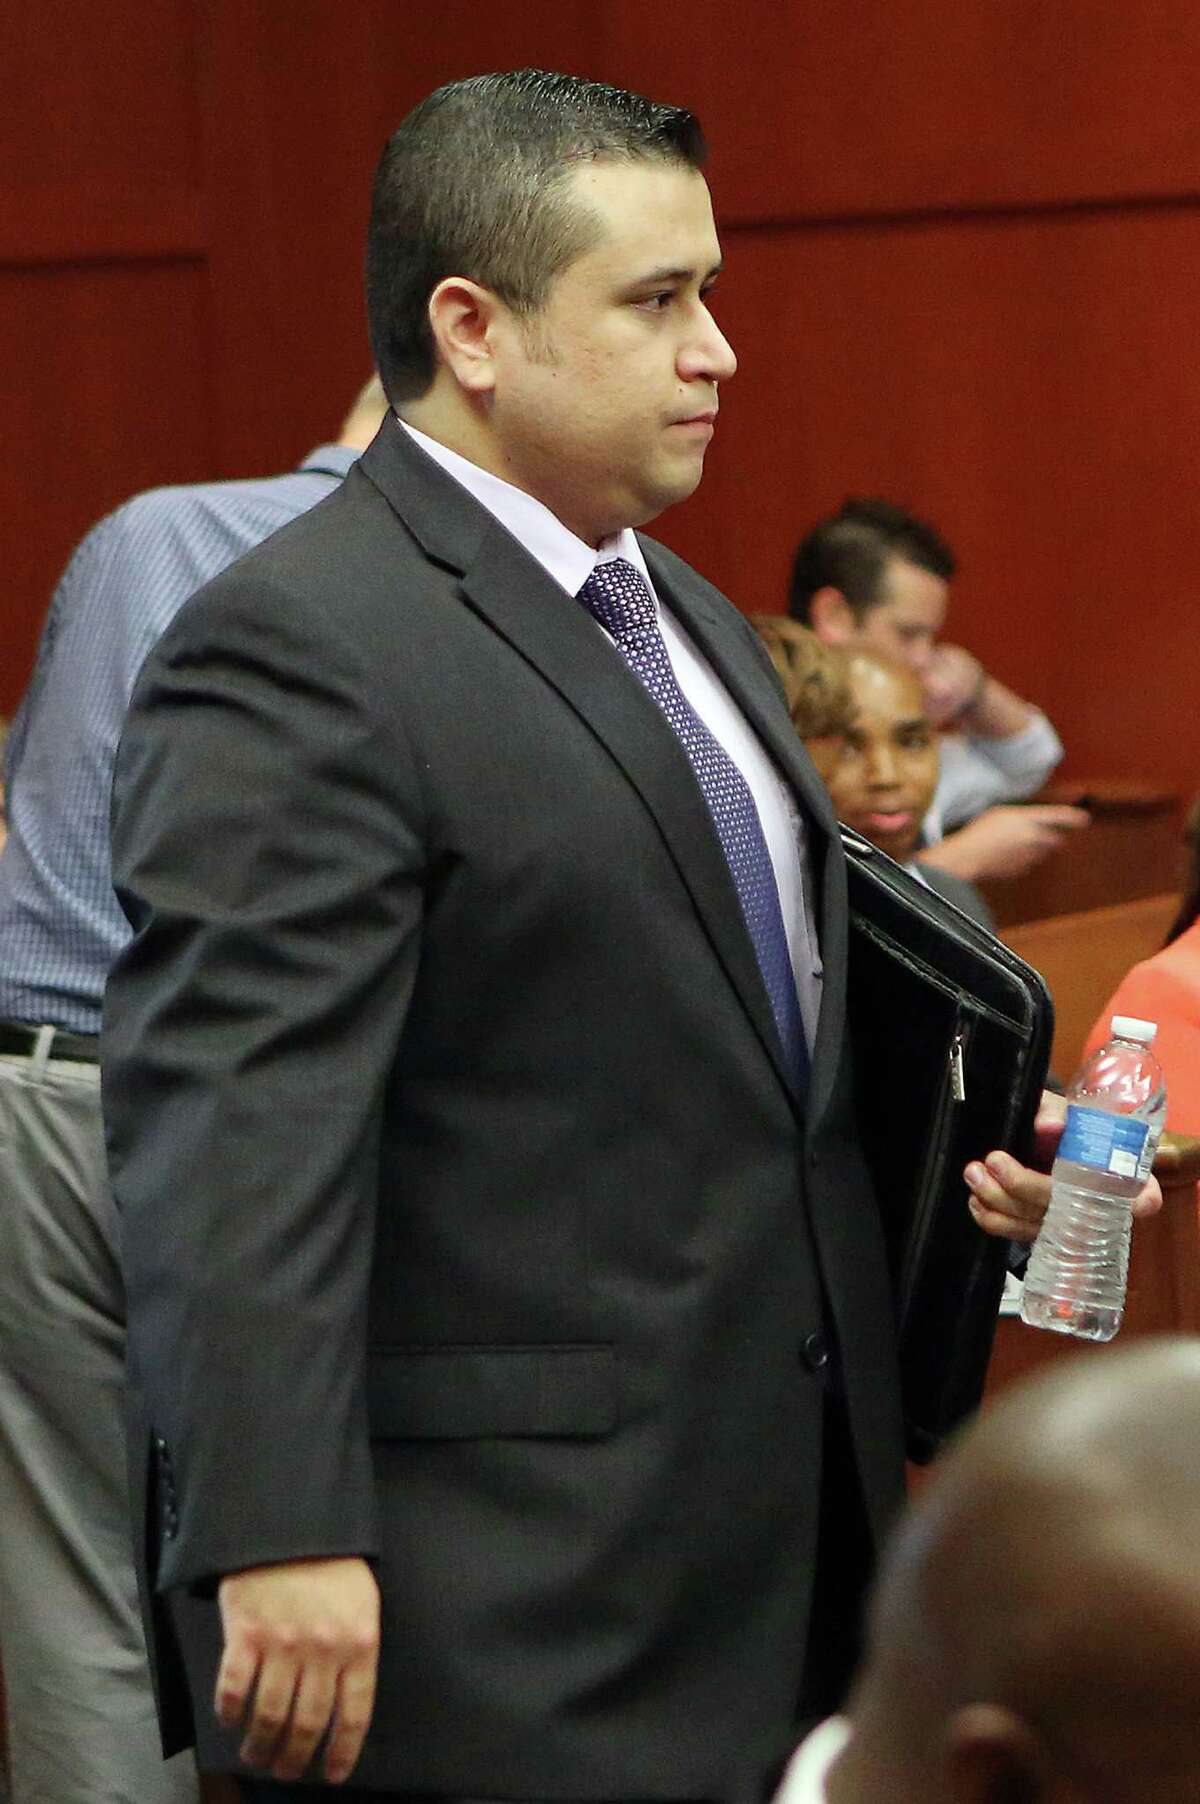 George Zimmerman enters the courtroom at his trial in Seminole County circuit court, in Sanford, Fla., Wednesday, July 3, 2013. Zimmerman is charged with second-degree murder in the fatal shooting of Trayvon Martin, an unarmed teen, in 2012. (AP Photo/Orlando Sentinel, Jacob Langston, Pool)